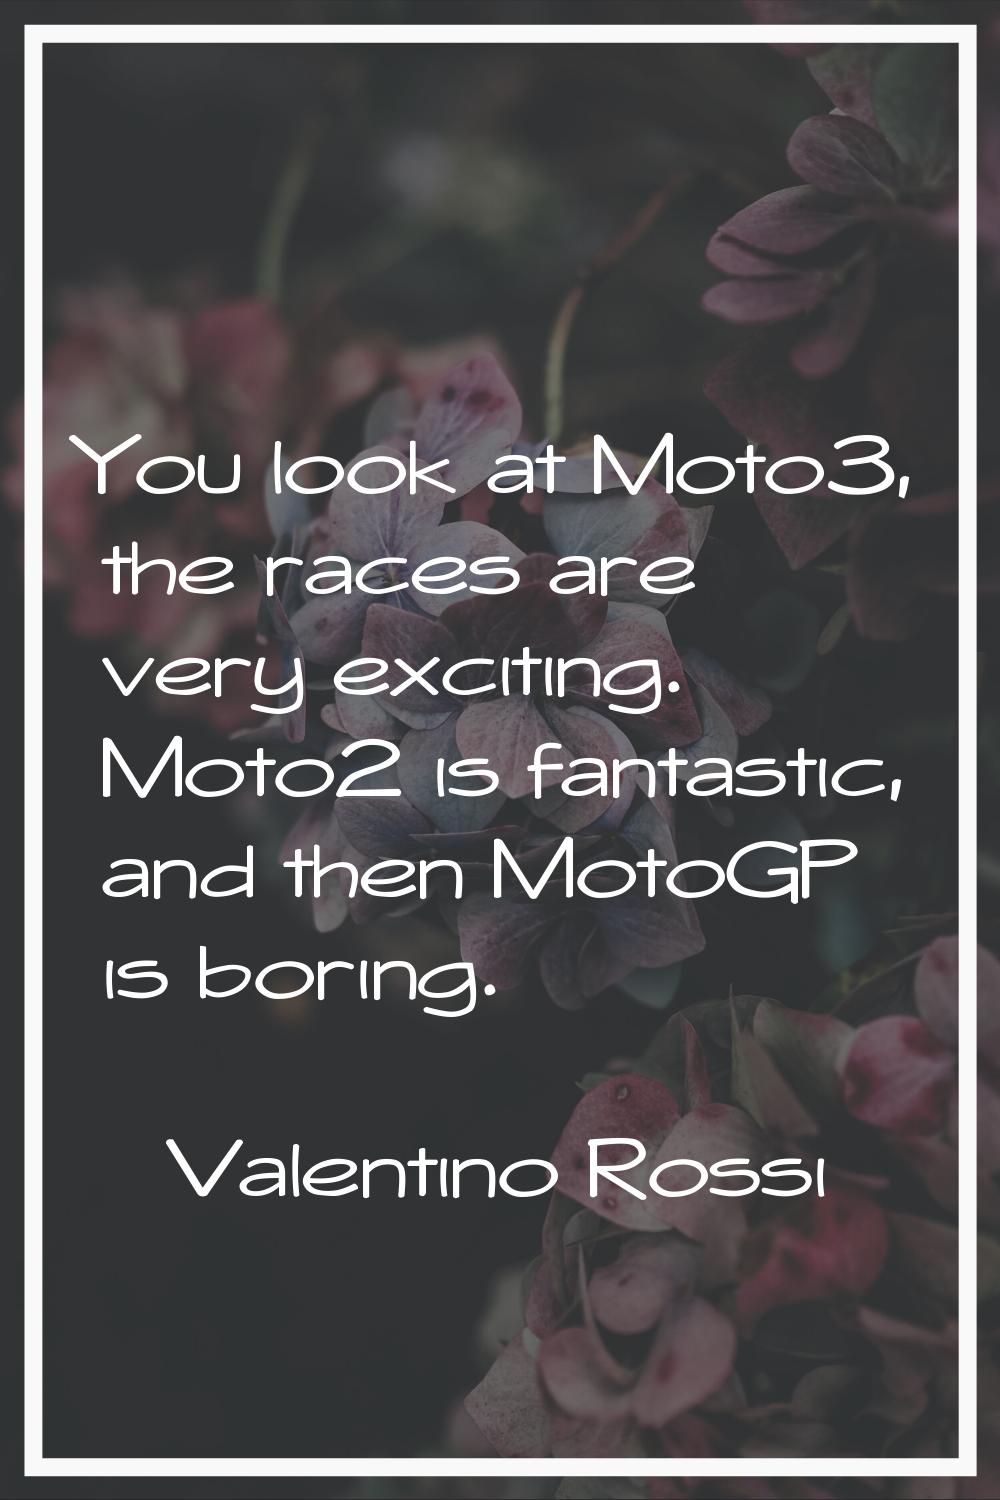 You look at Moto3, the races are very exciting. Moto2 is fantastic, and then MotoGP is boring.